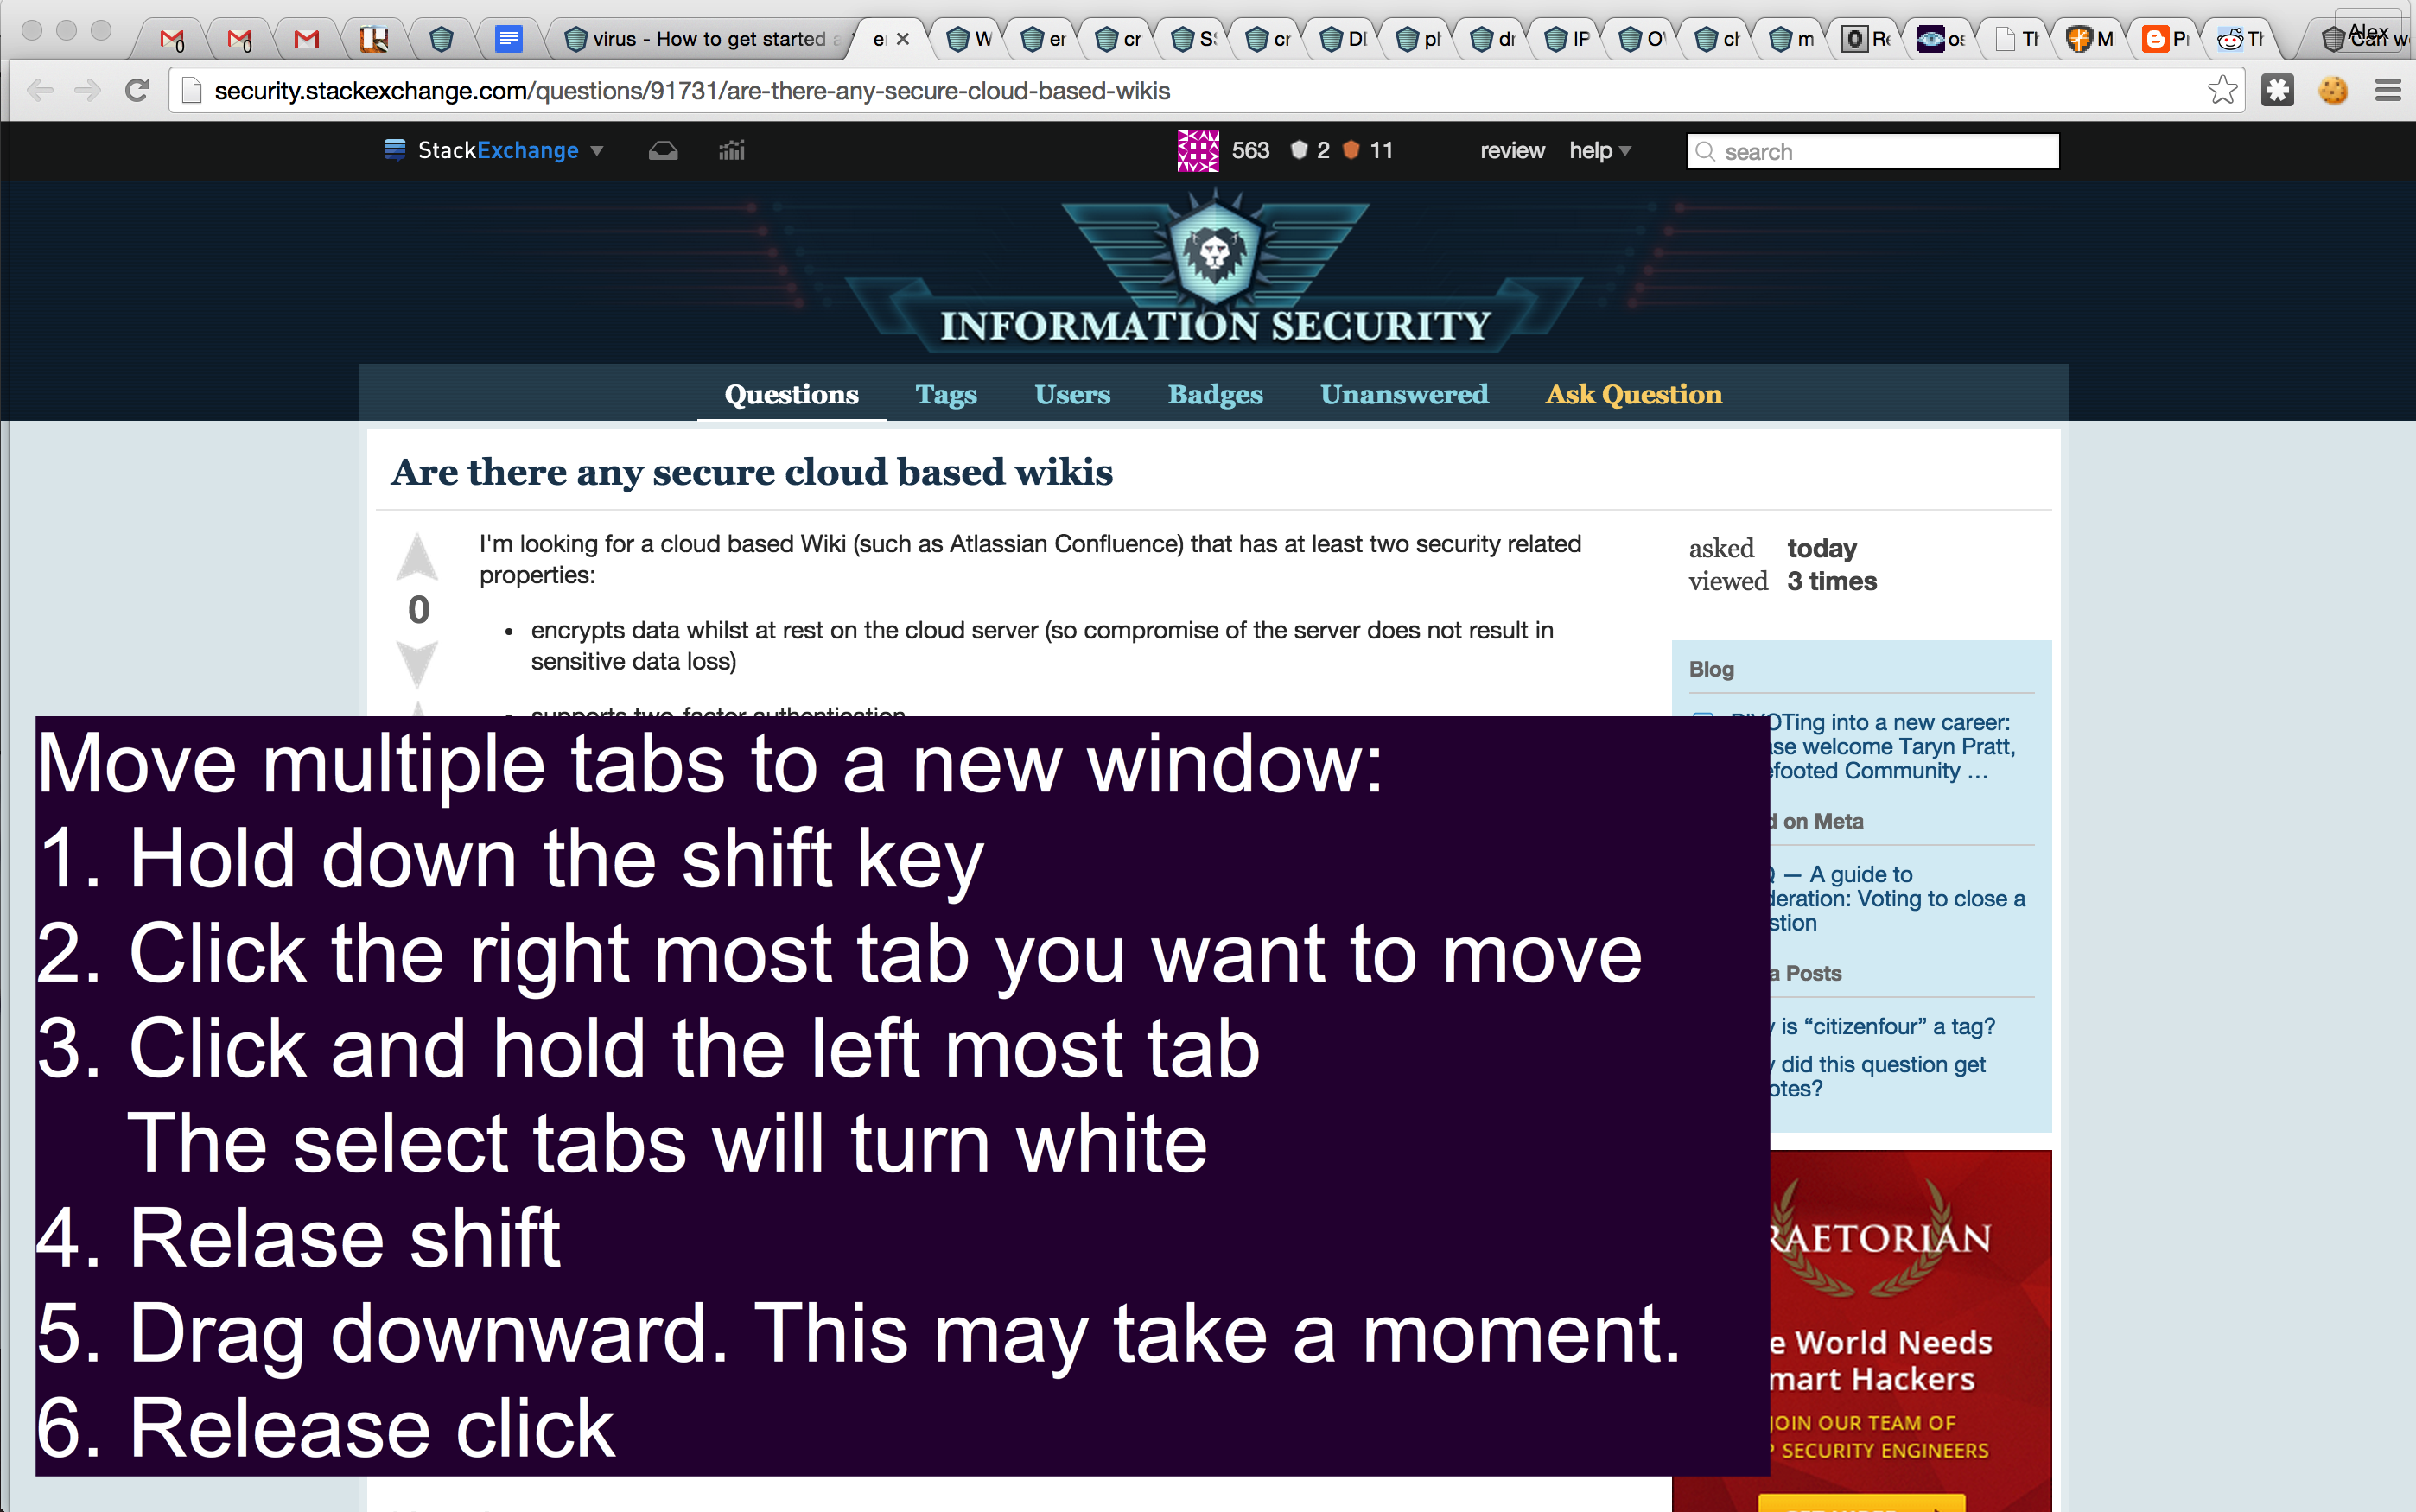 Click to see larger: Move tabs to a new window